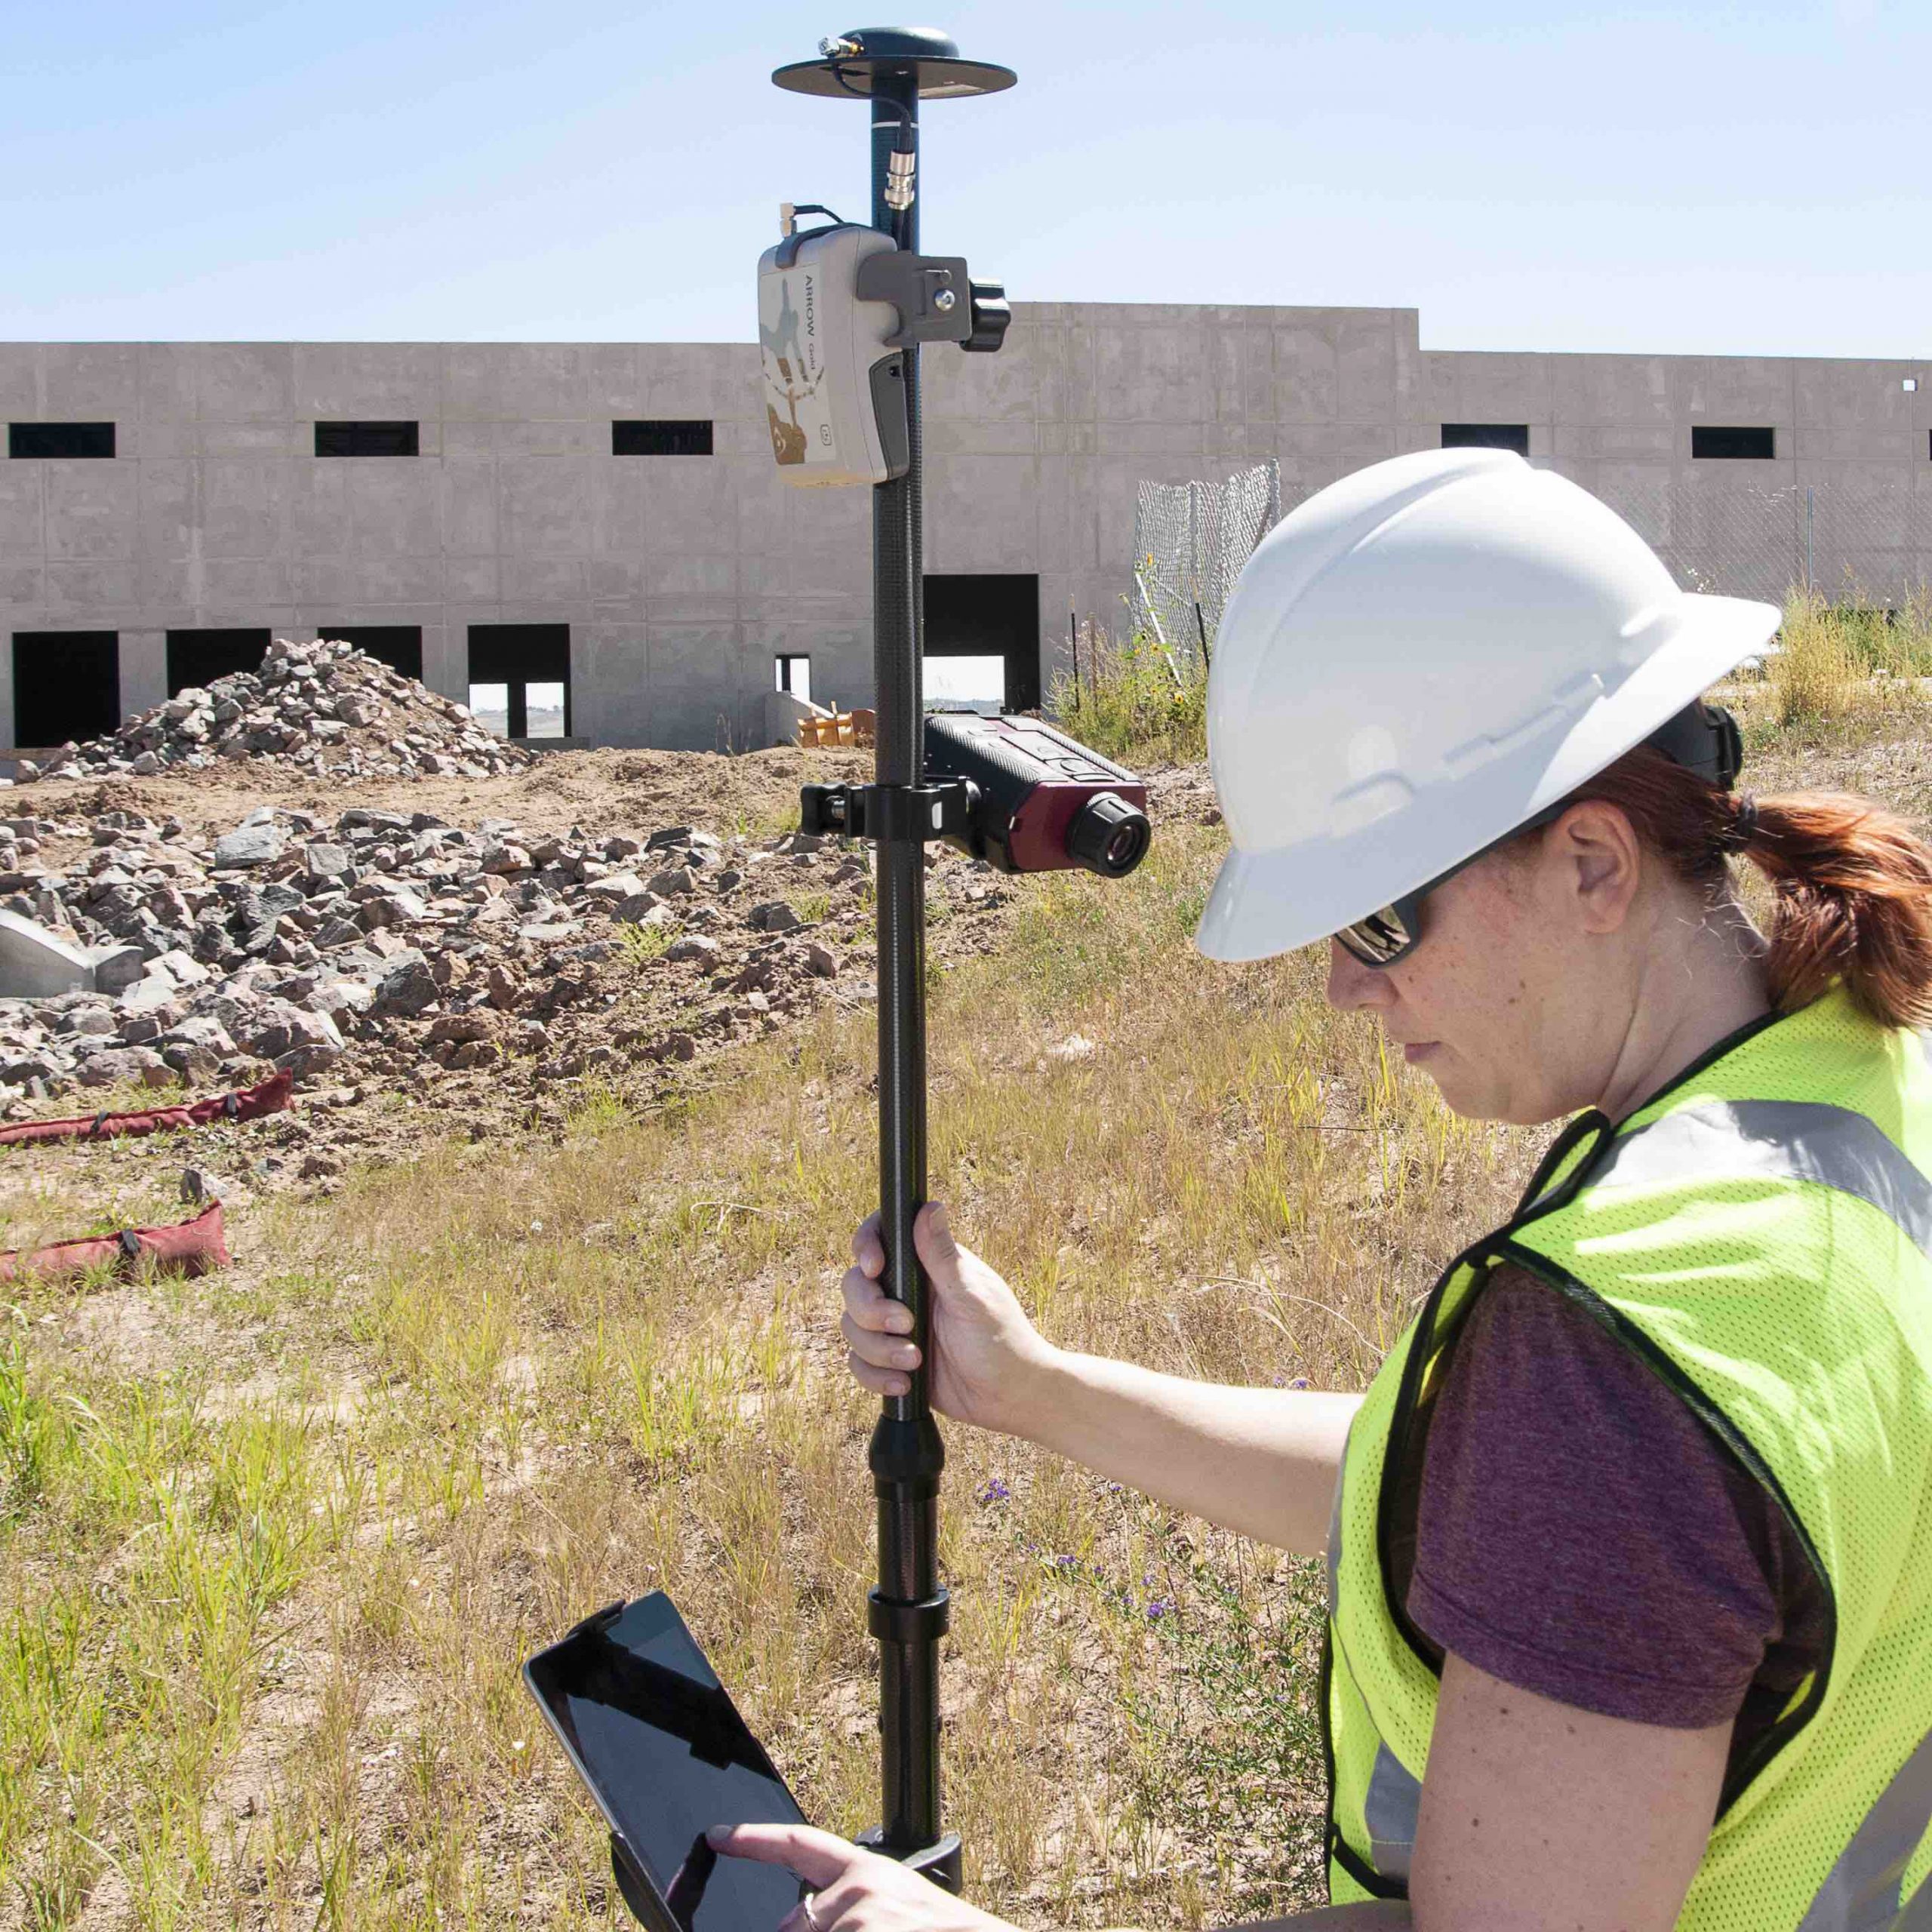 2019 Esri User Conference Sessions We Recommend: DENVER DDSI laser mapping for utility locates at telecommunications sites with Eos Positioning Systems RTK laser mapping solution, ESRI GIS, and laser technology inc TRUPULSE 200x rangefinder in Colorado